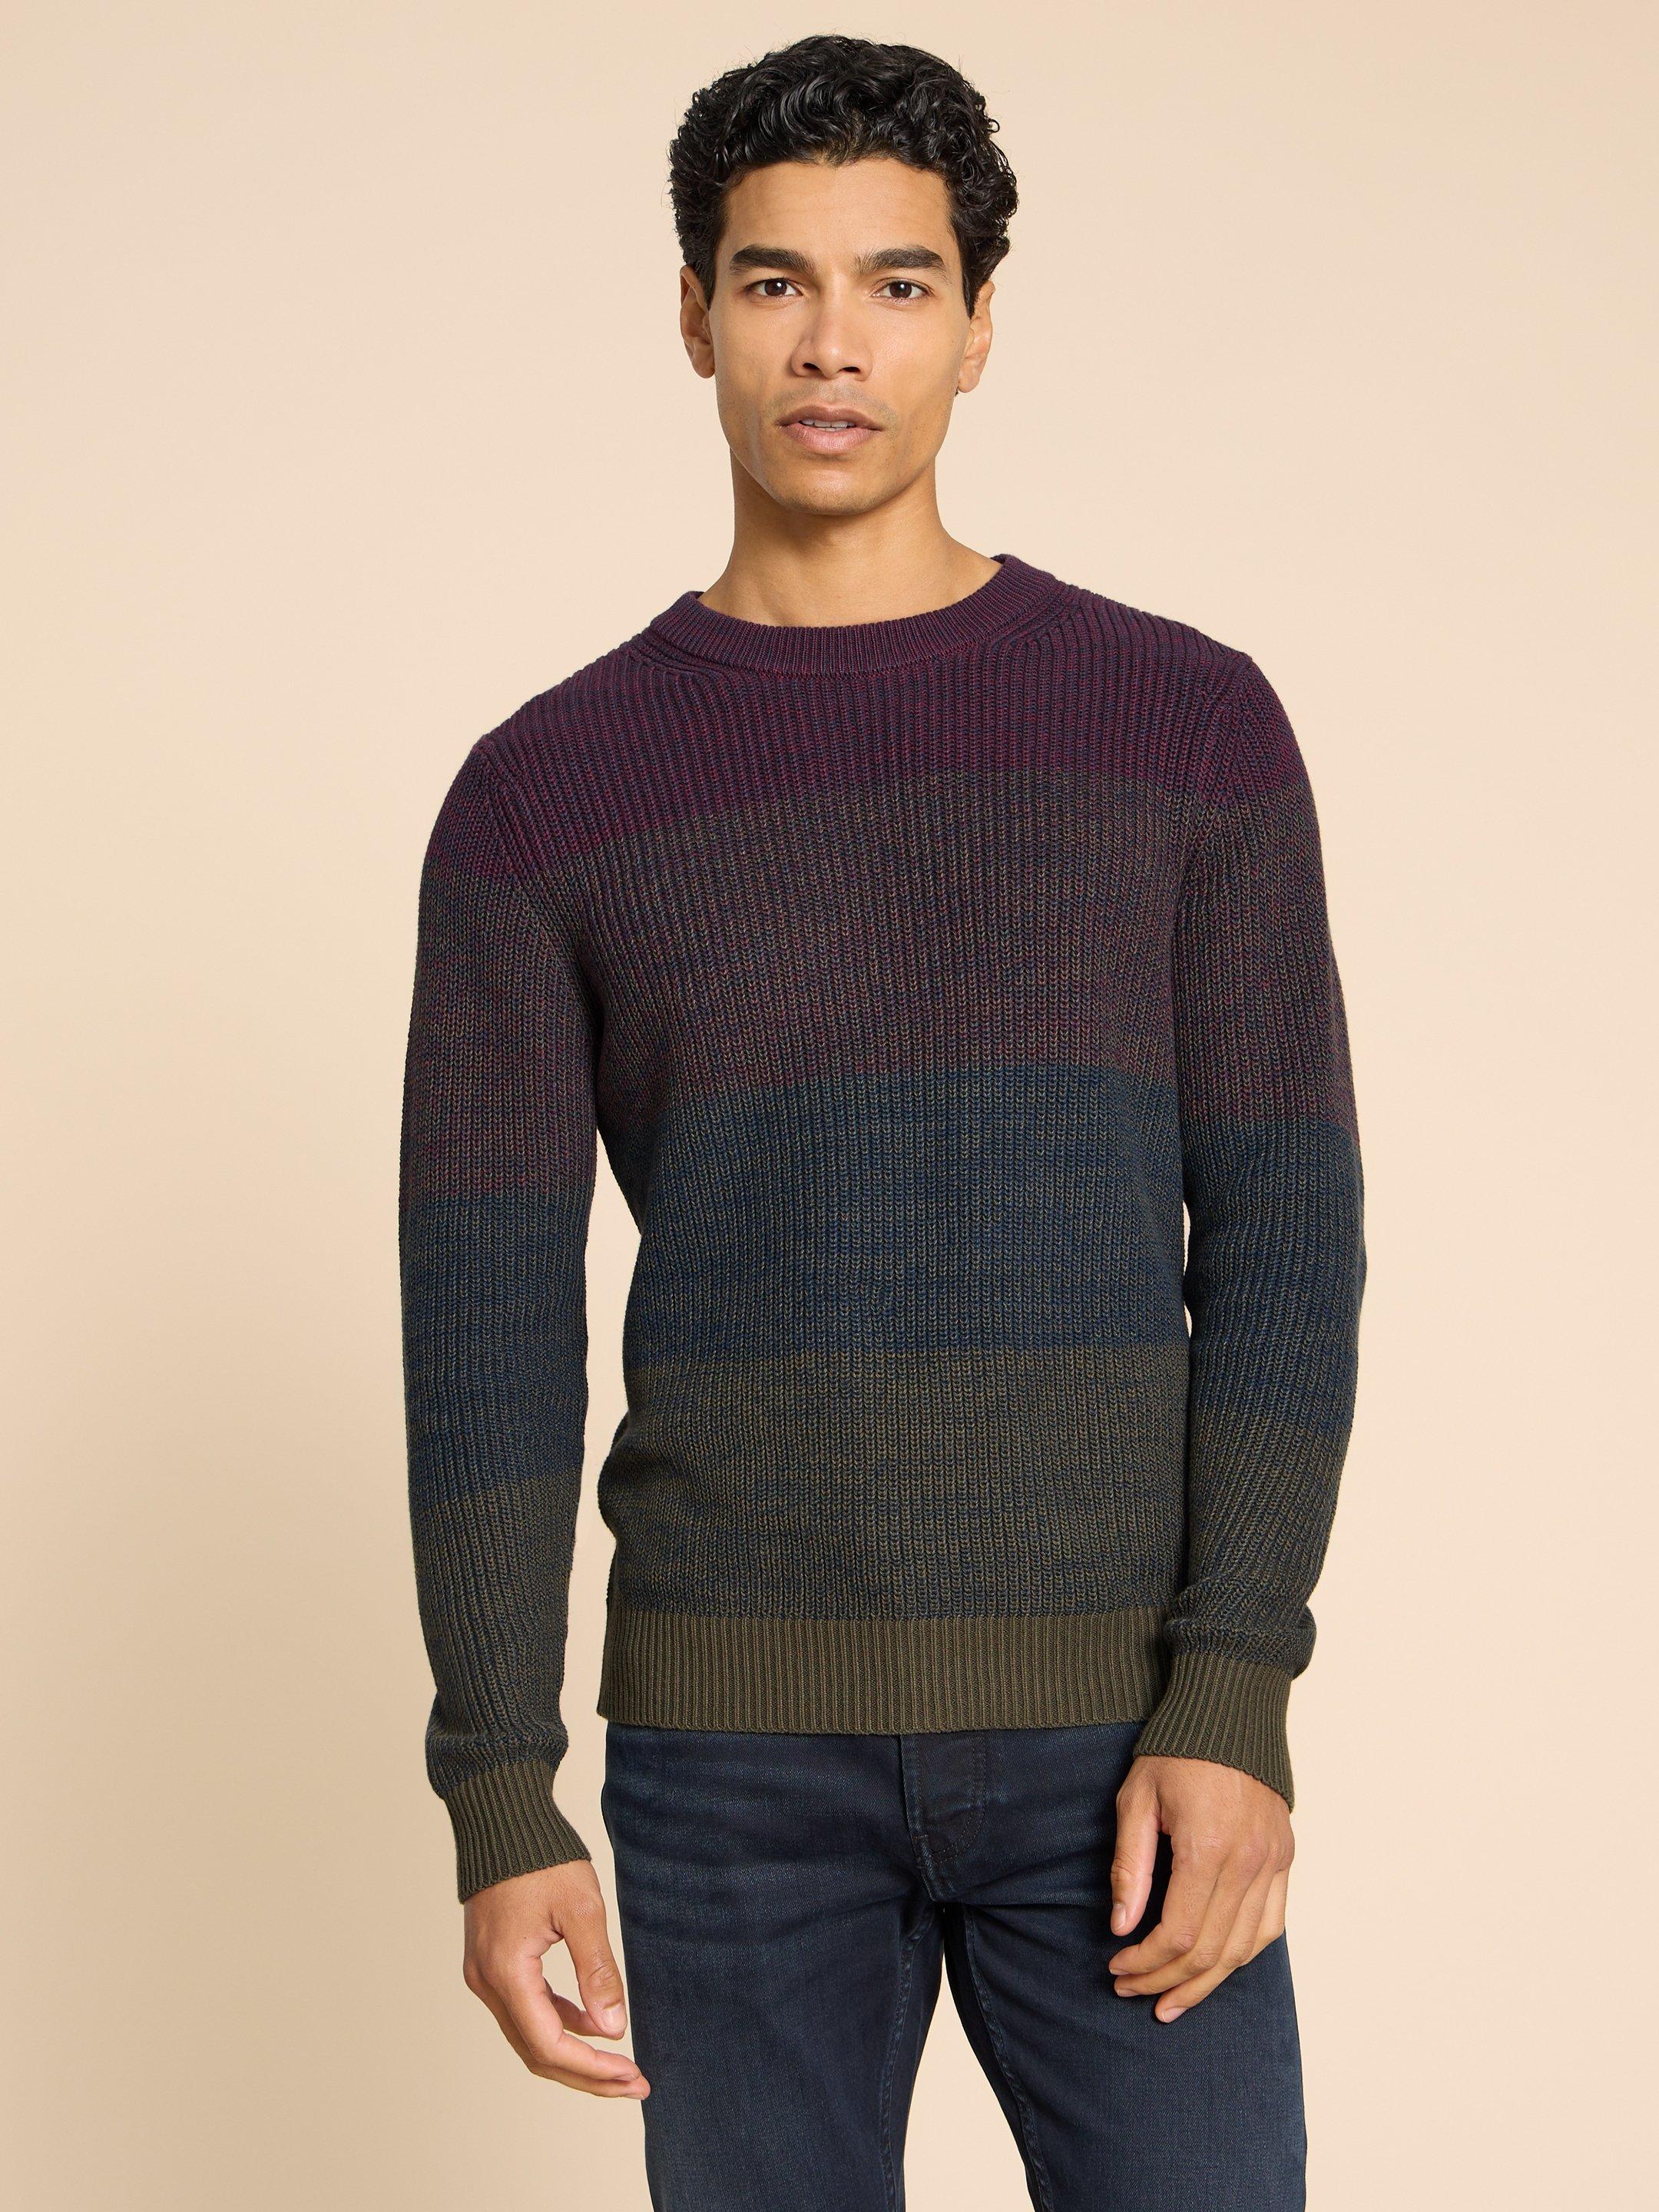 Twisted Colourblock Jumper in PLUM MLT - MODEL FRONT